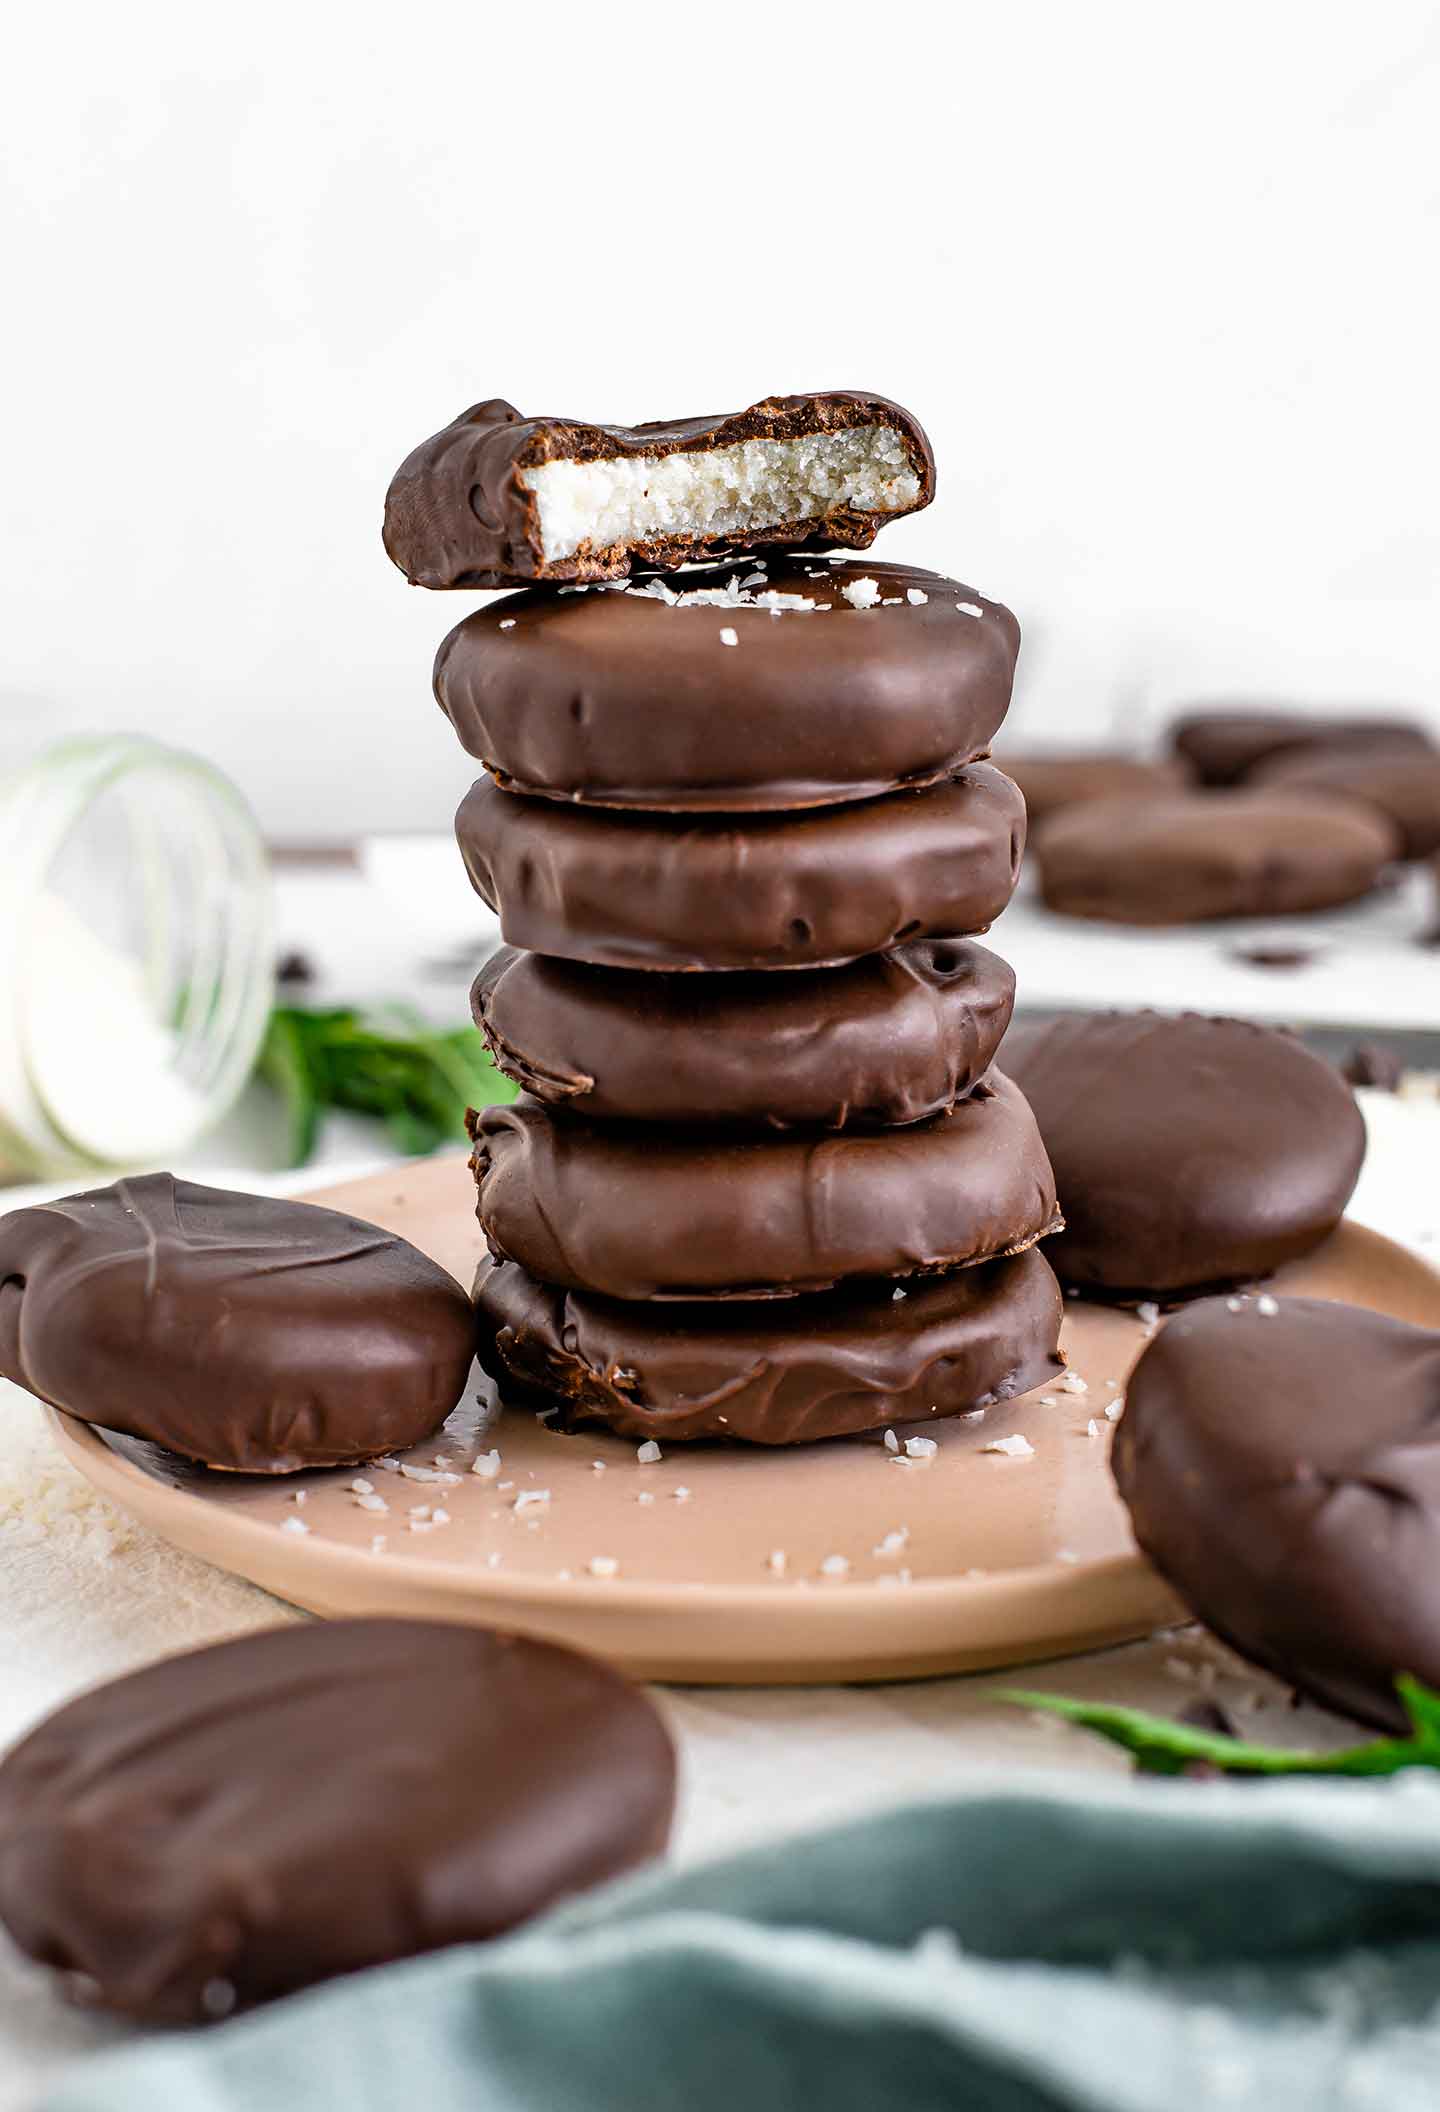 Side view of coconut peppermint patties scattered and stacked on a plate. The top patty has a bite missing from it, revealing the firm coconut interior.